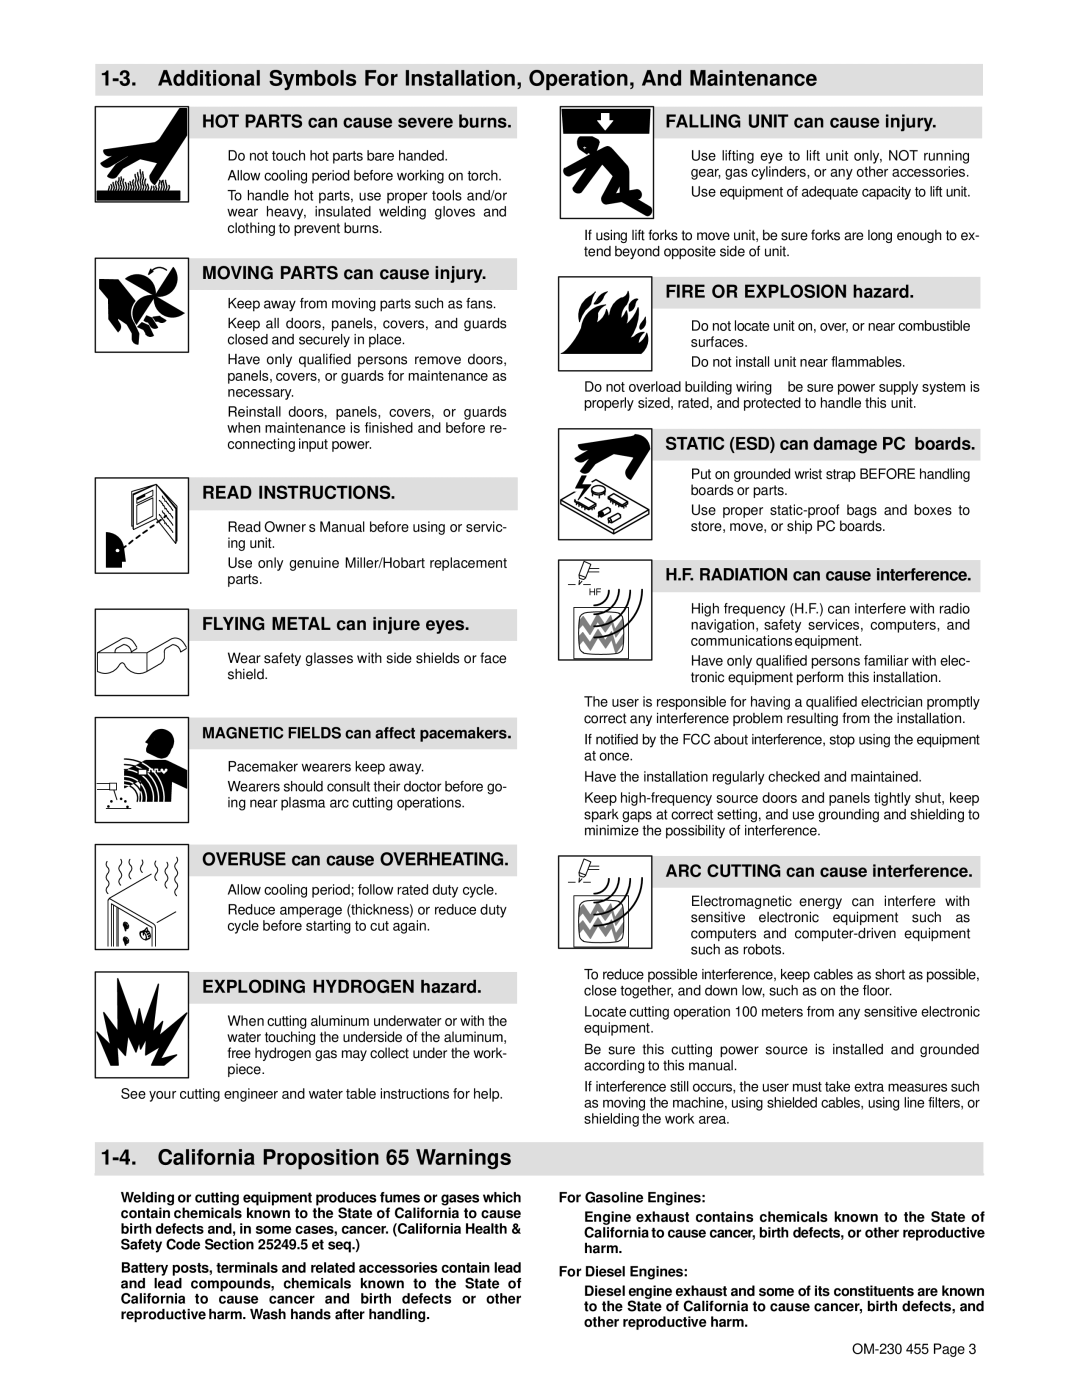 Hobart Welding Products 250ci, HP-25 TORCH manual California Proposition 65 Warnings 